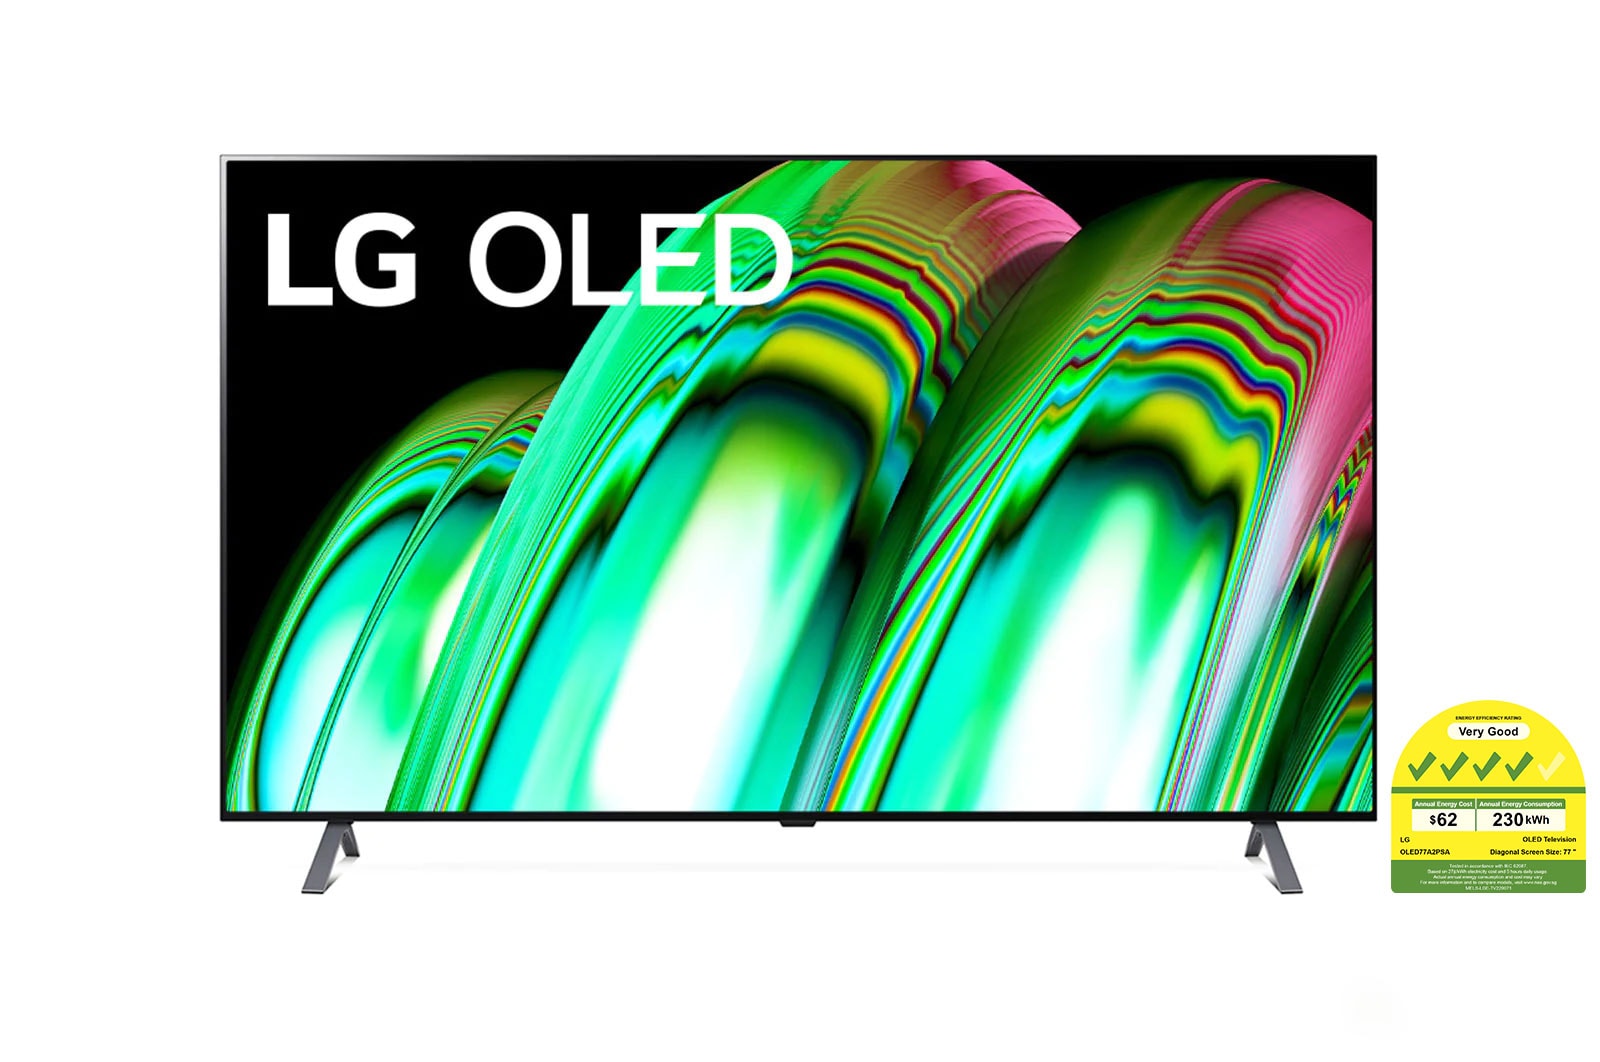 LG OLED TV A2 77 inch 4K Smart TV | Wall mounted TV | TV wall design | Ultra HD 4K resolution | AI ThinQ, OLED77A2PSA